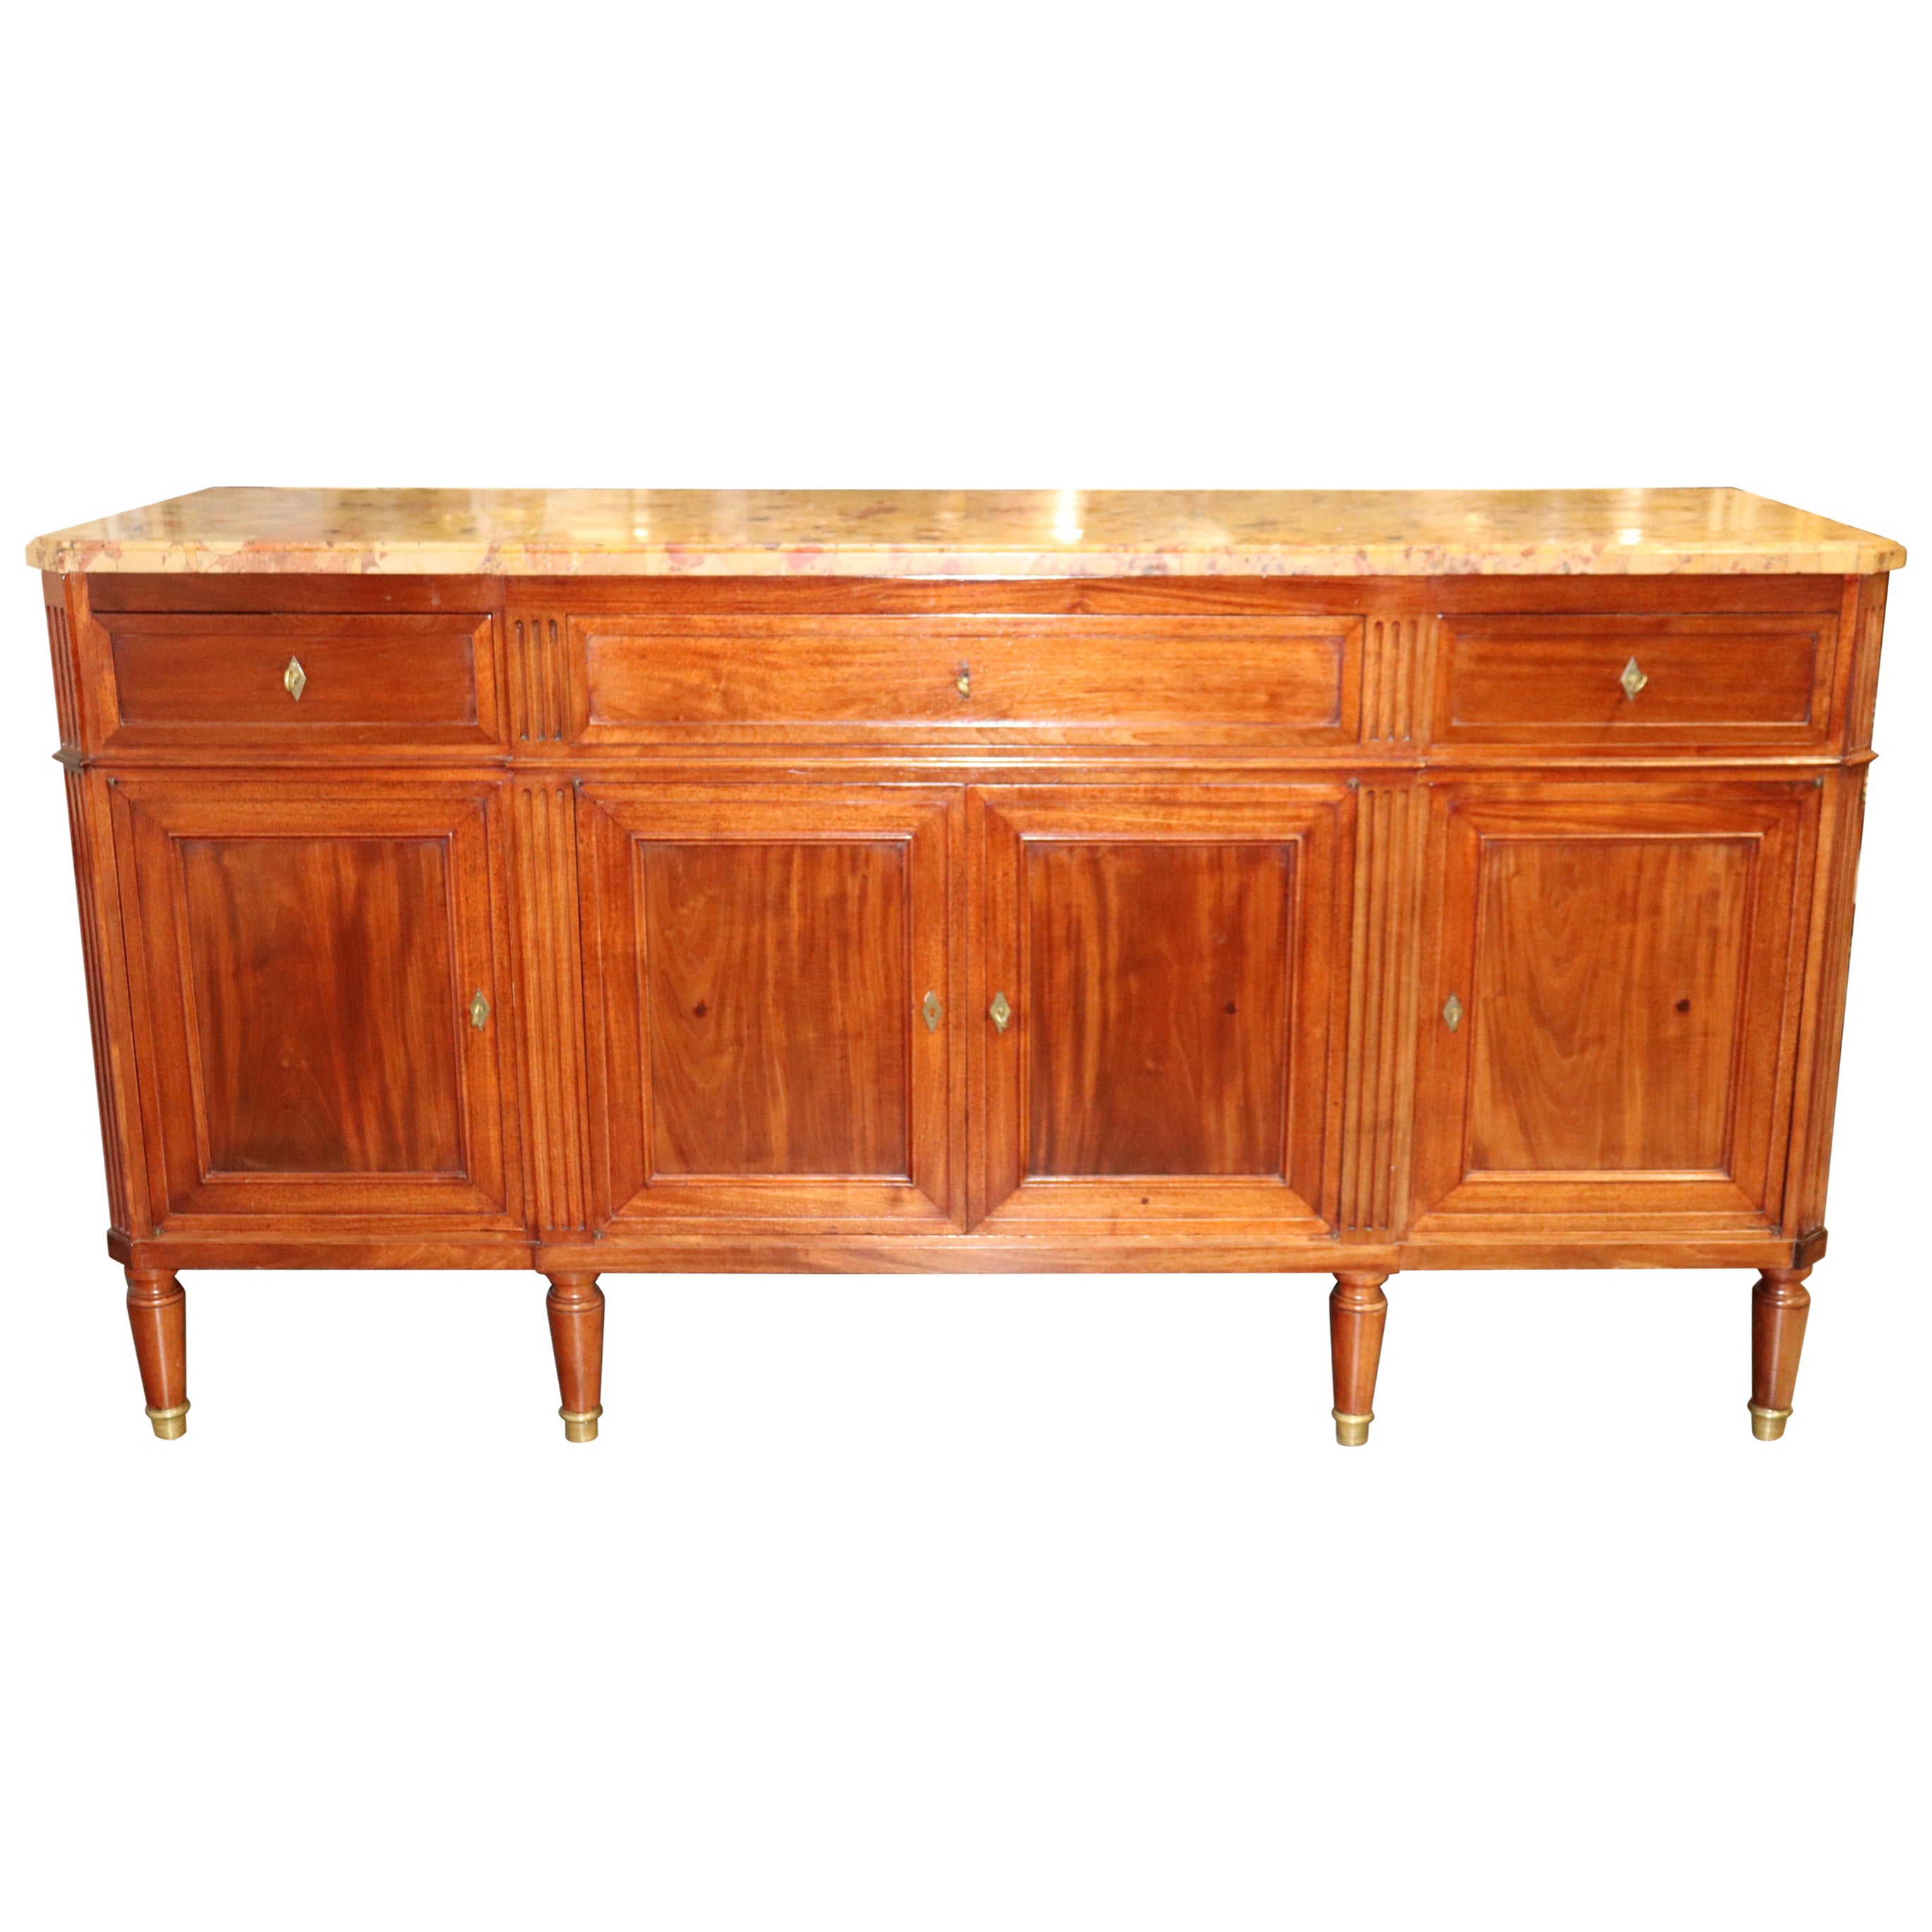 Fine Quality French Directoire Maison Jansen Breche D' Alep Marble Sideboard  For Sale